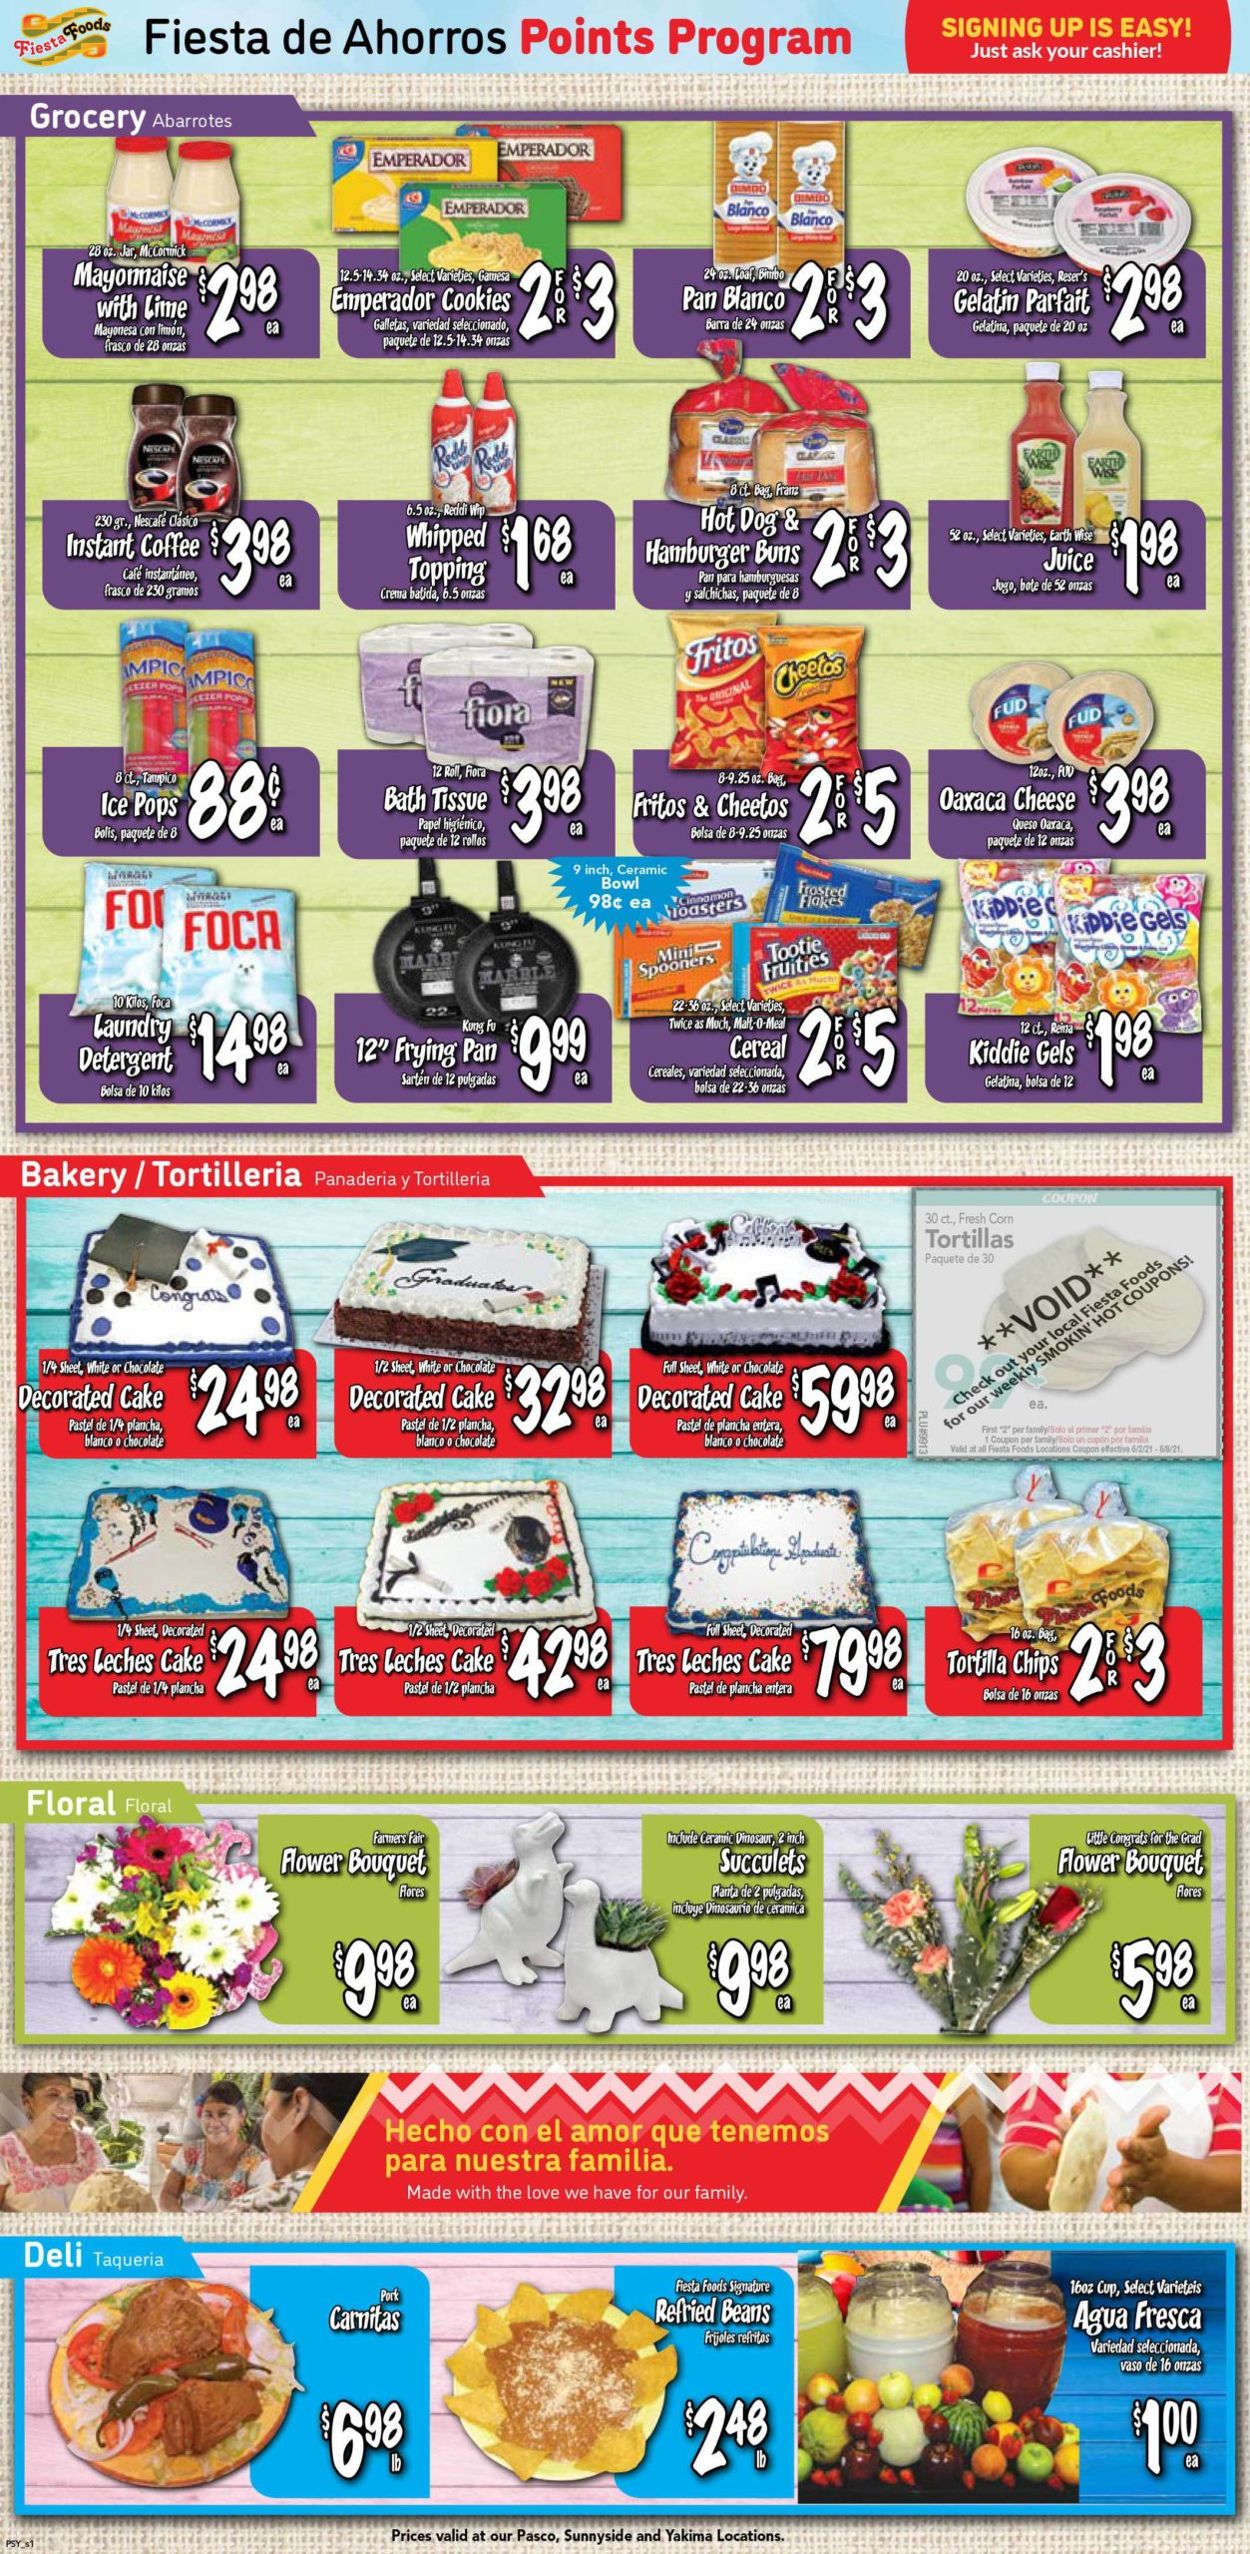 Fiesta Foods SuperMarkets Ad from 06/02/2021